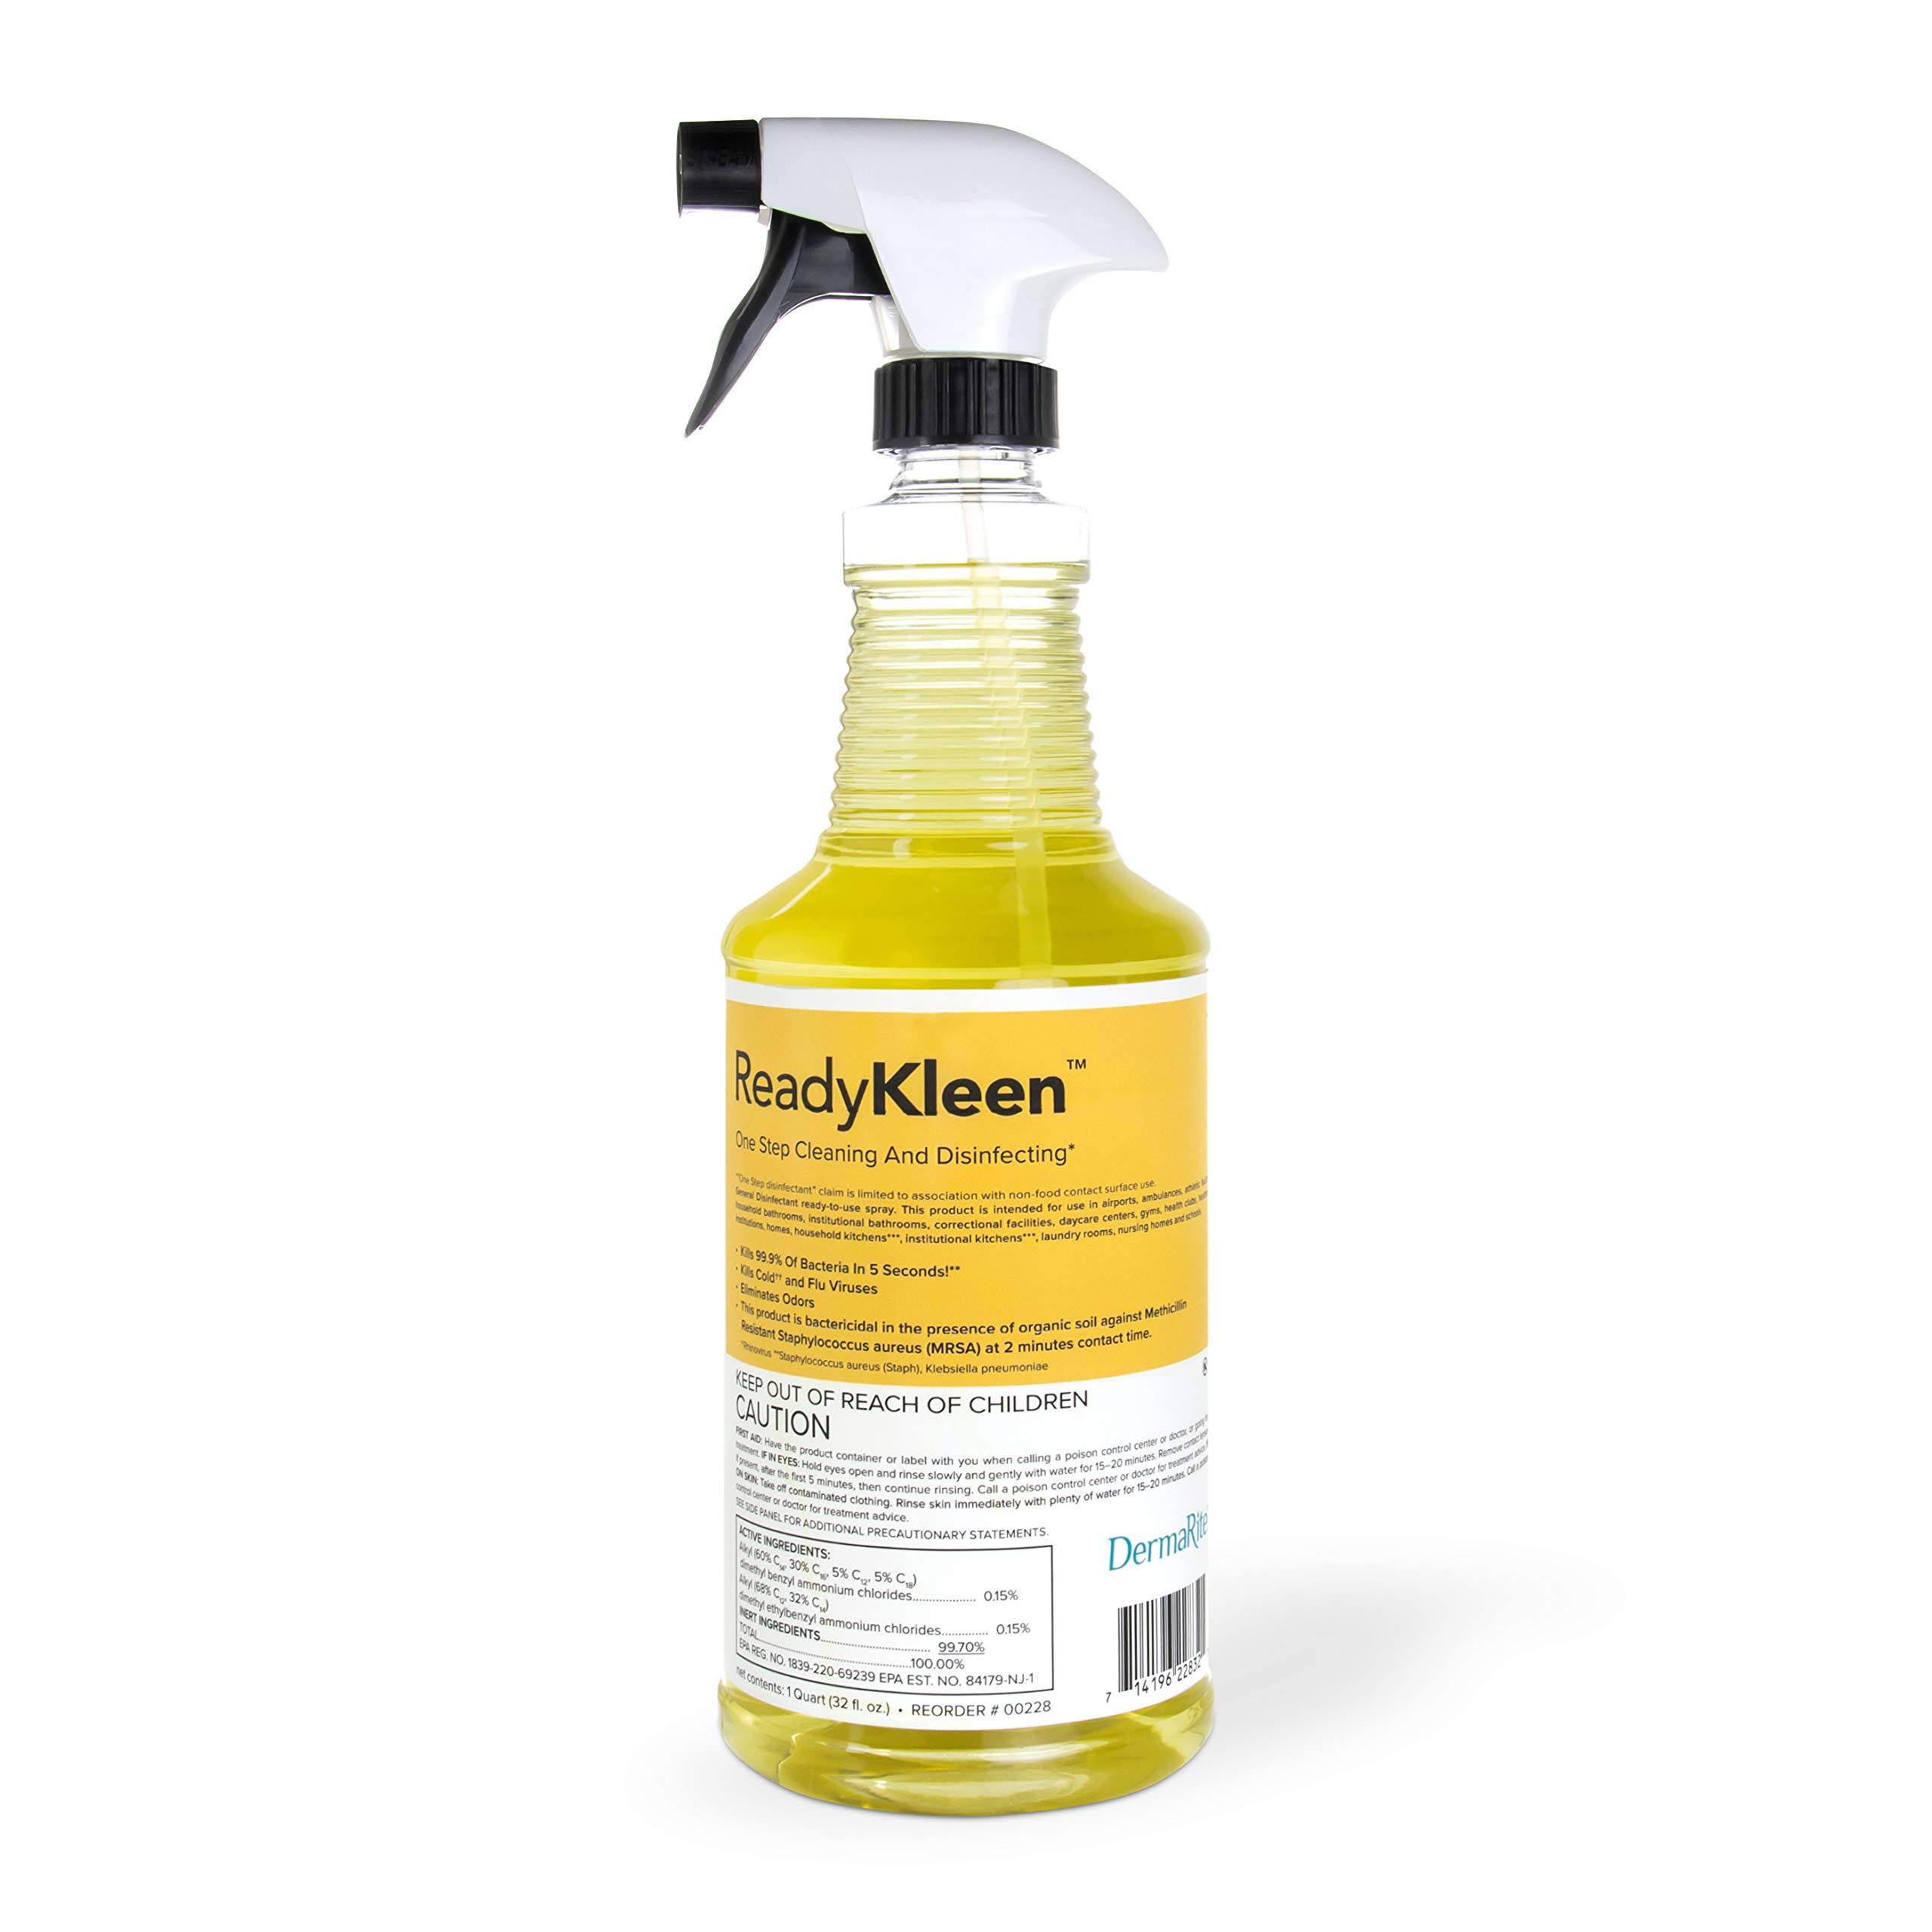 ReadyKleen Scented Surface Disinfectant Cleaner, 32 oz. Spray Bottle